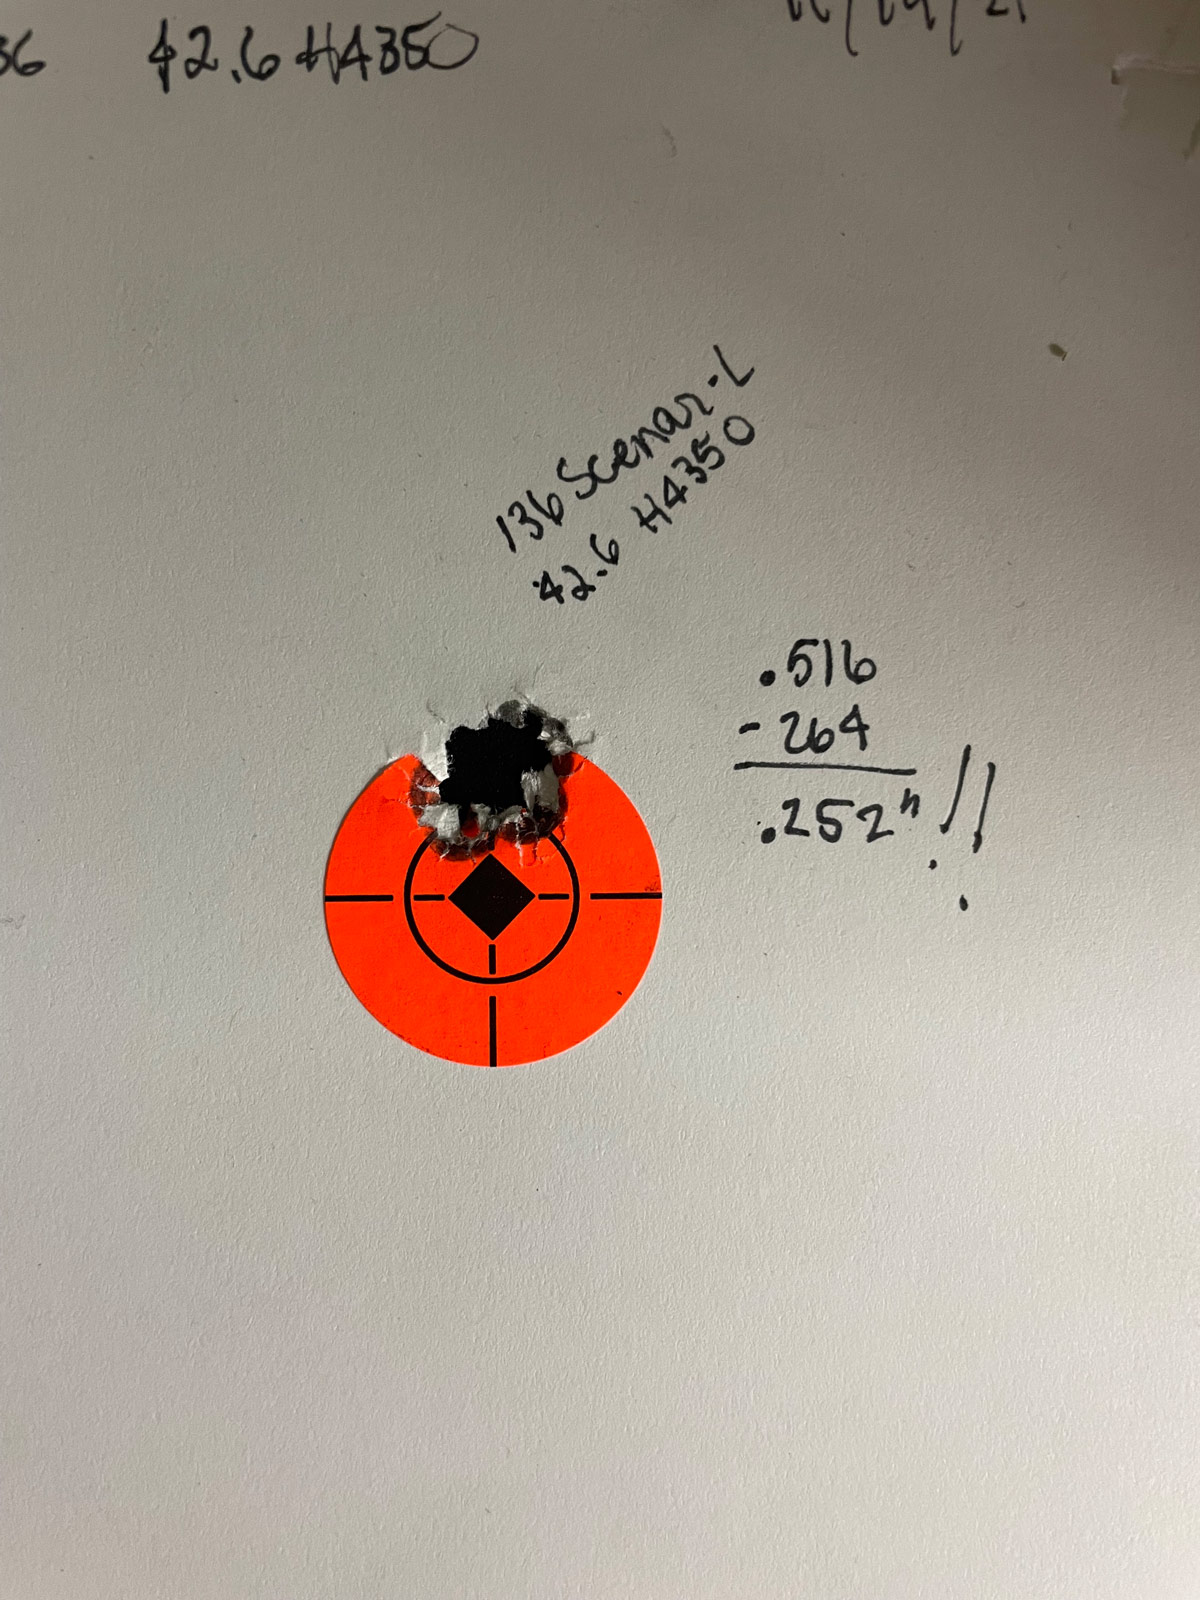 0.252 Inch group on target